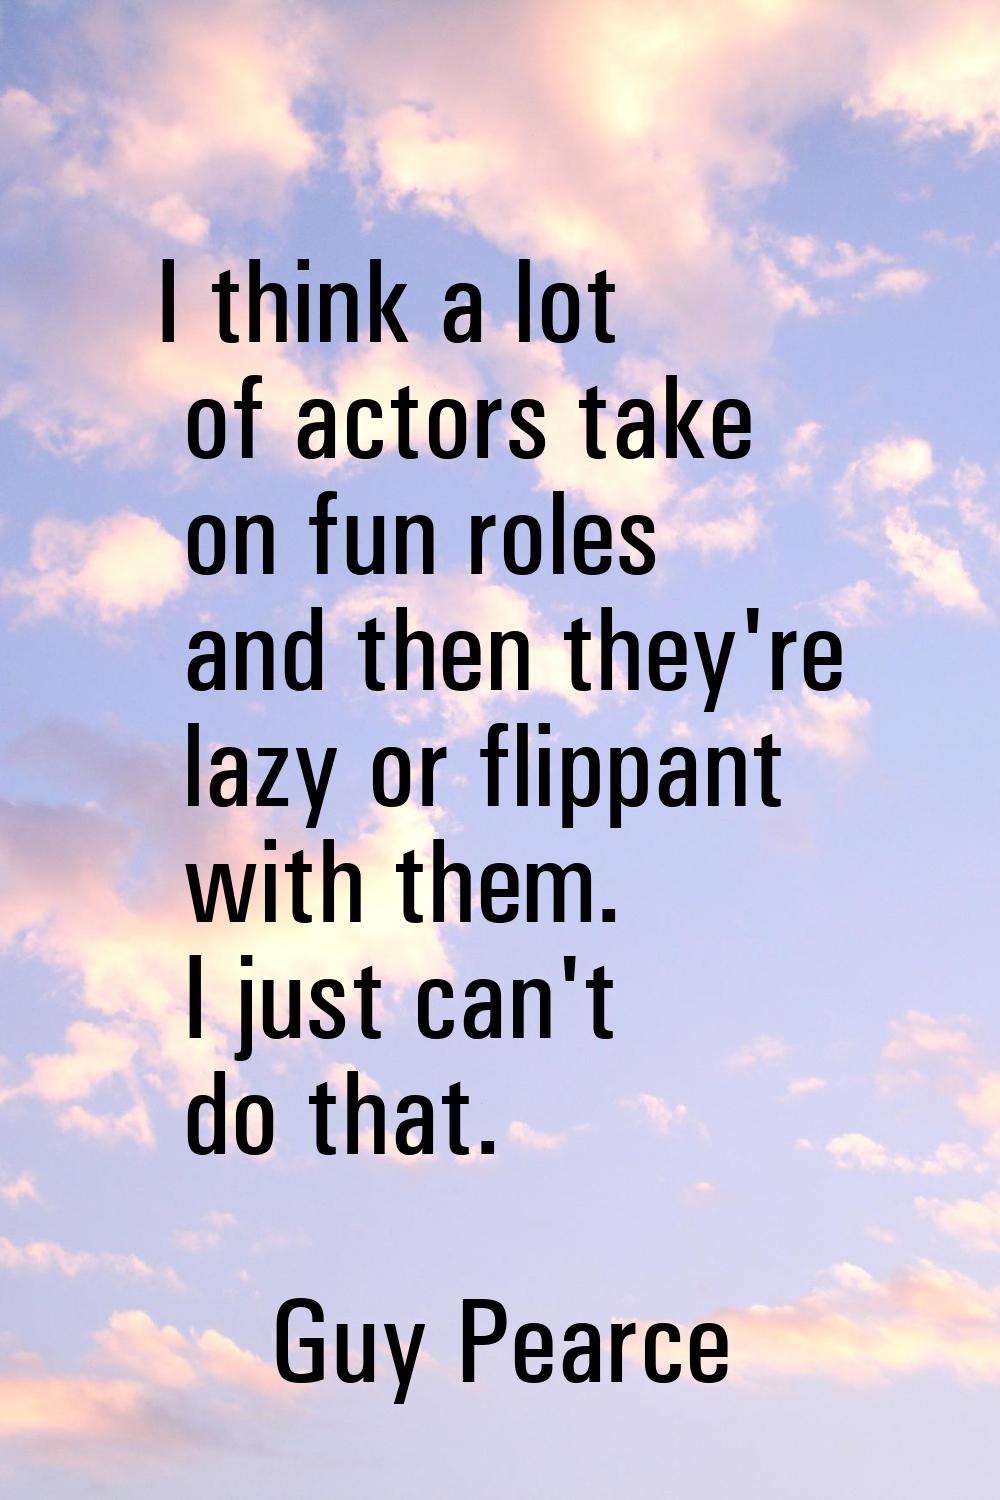 I think a lot of actors take on fun roles and then they're lazy or flippant with them. I just can't